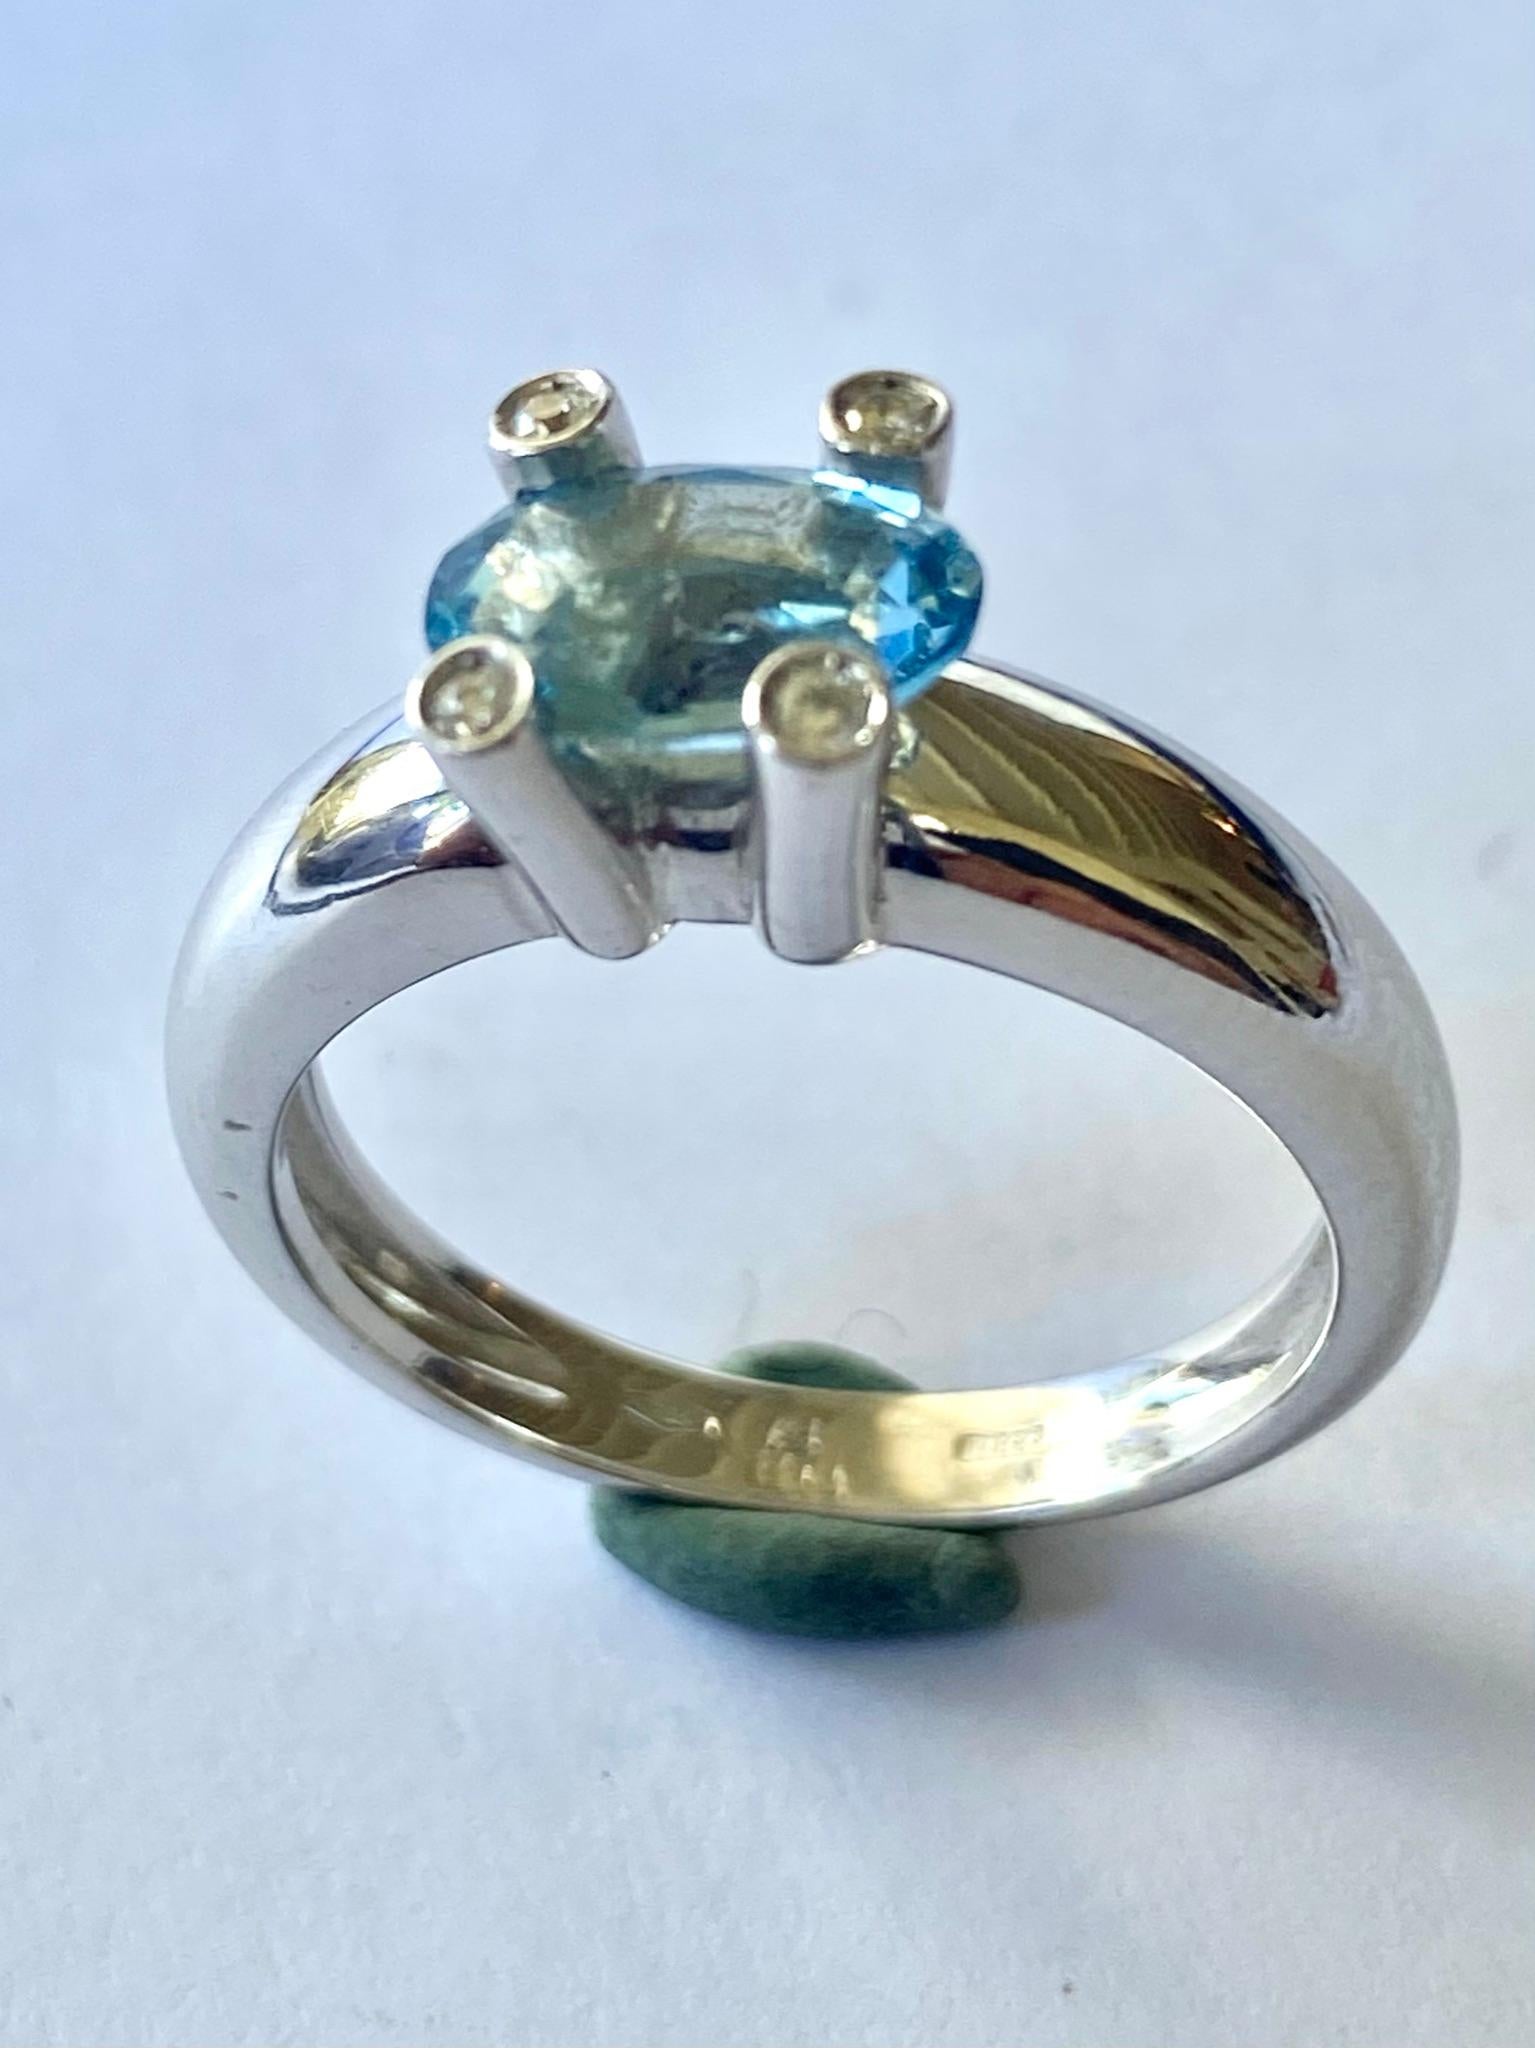 One (1) 18 Karat White Gold Ring, stamped 750 and [* 3231 AL ]   = Alberti Gioelli Valenza Italy
Aquamarine  Oval Mixed Cut, light Blue, Carat weight: 1.02 ct 
4 Briljant Cut Diamonds = 0.04 ct VS  F/G
Weight of the ring: 6.41 grams
Sice of the